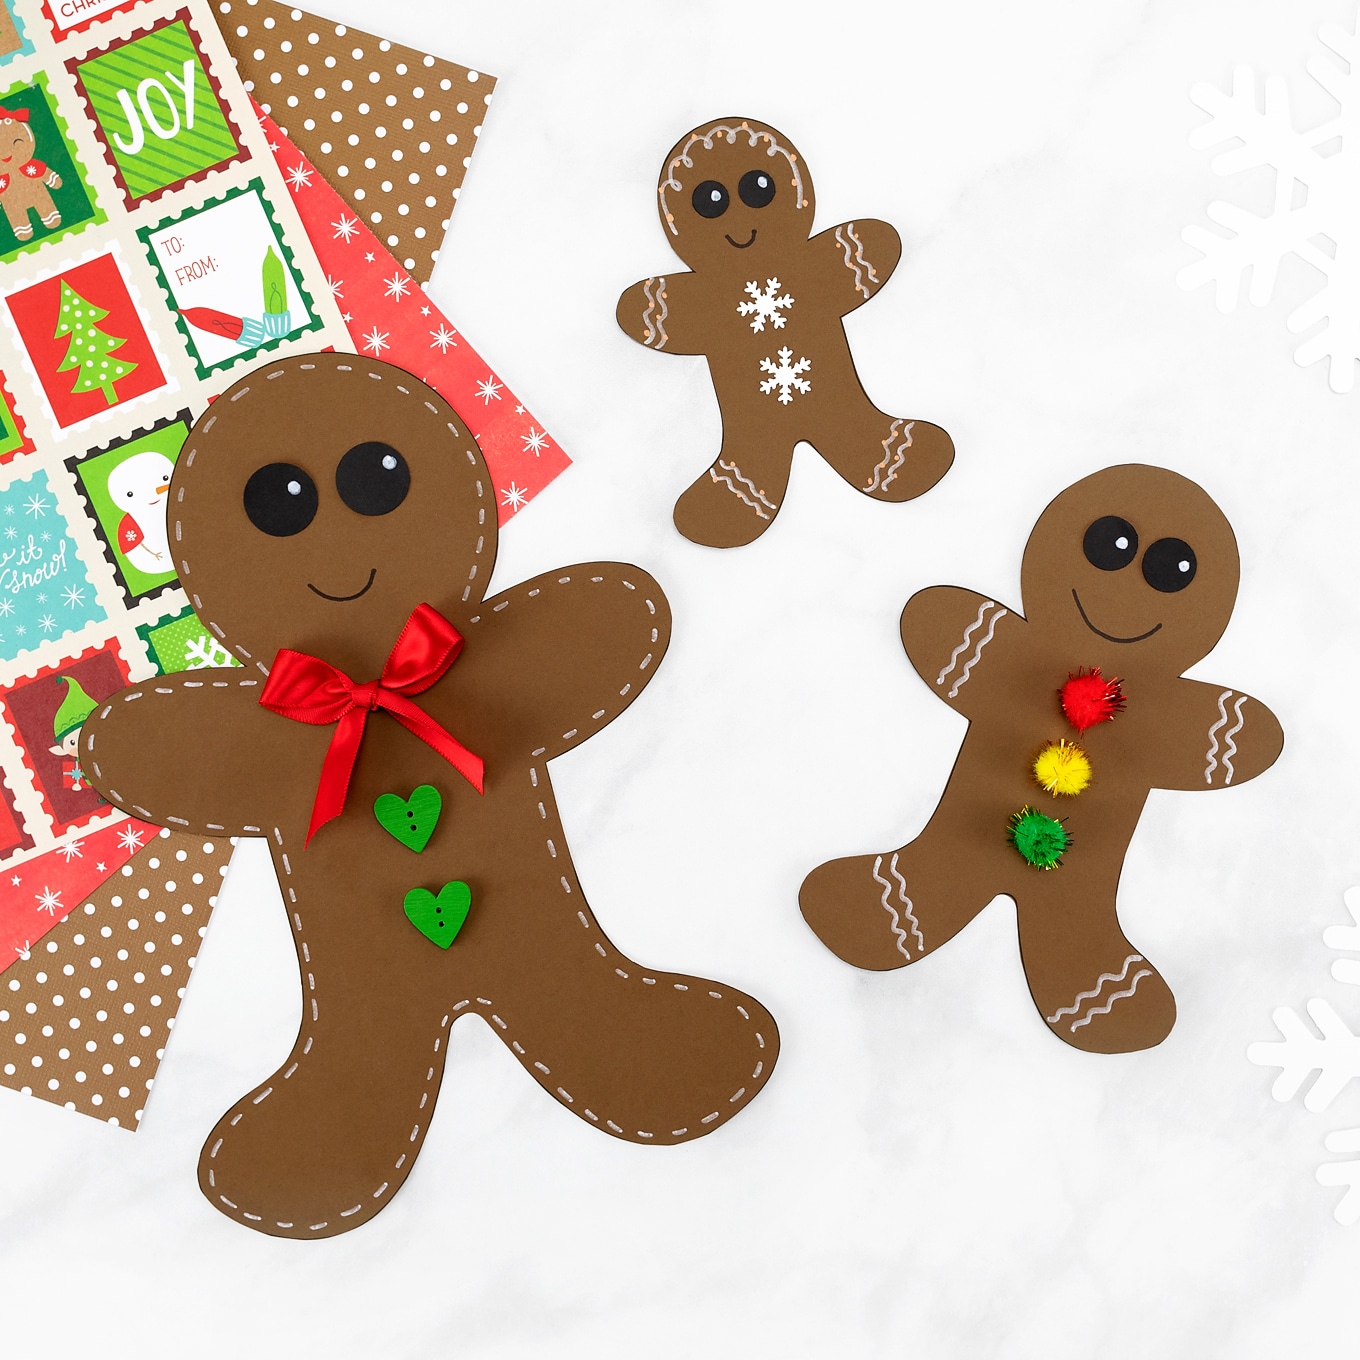 Best Christmas Paper Crafts featured by top Seattle lifestyle blogger, Marcie in Mommyland: Gingerbread Man Template